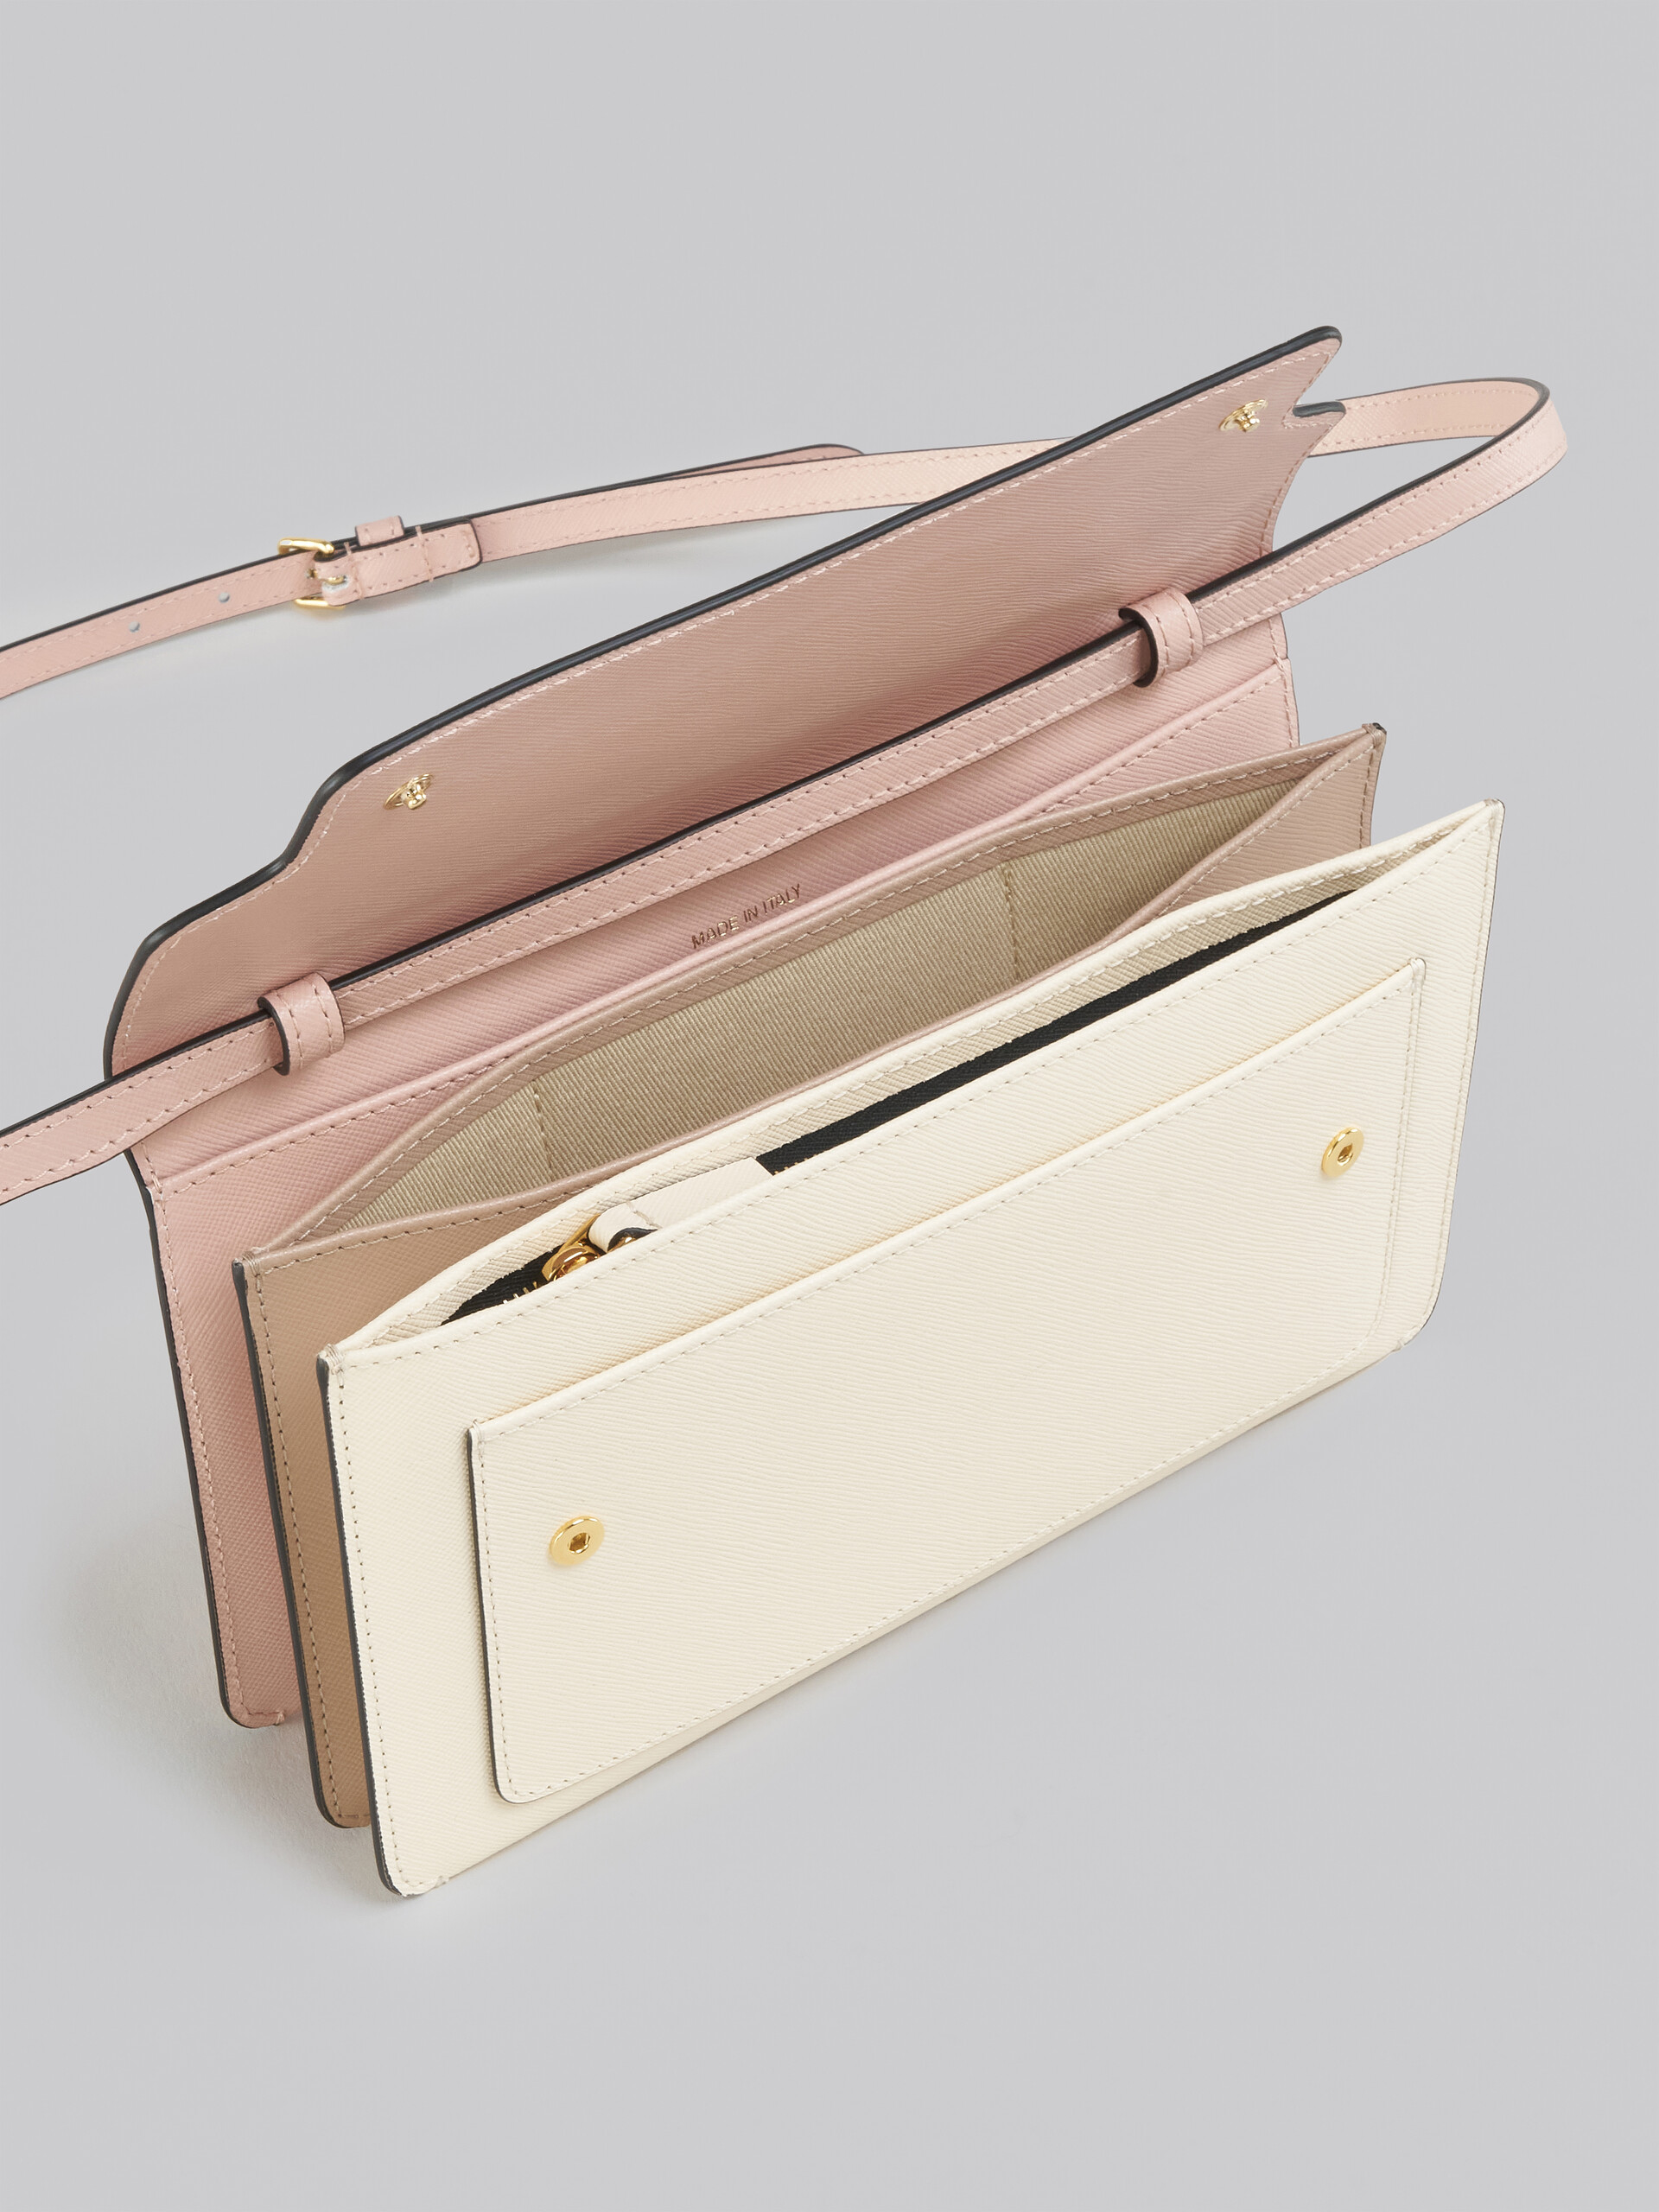 Trunk Clutch in pink white and beige saffiano leather - Pochettes - Image 4